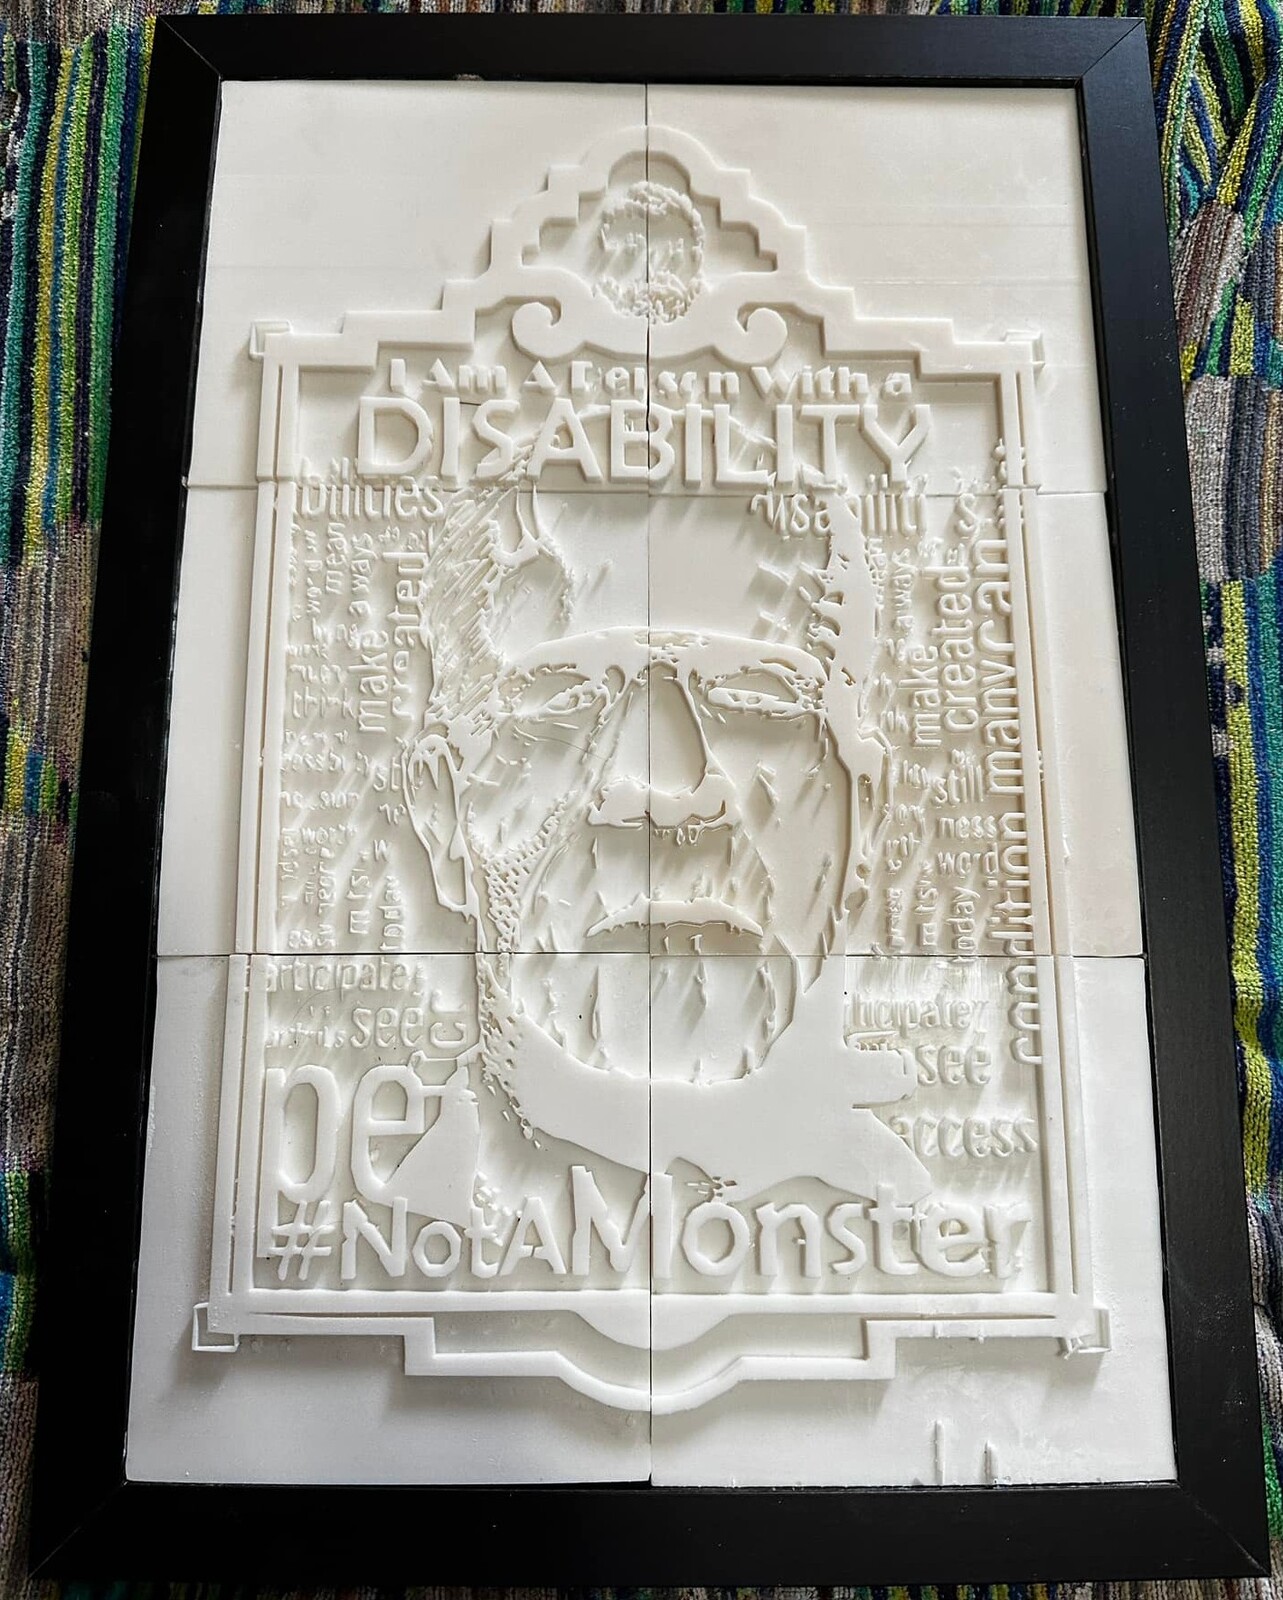 A photo of the tactile 3d print for #NotAMonster